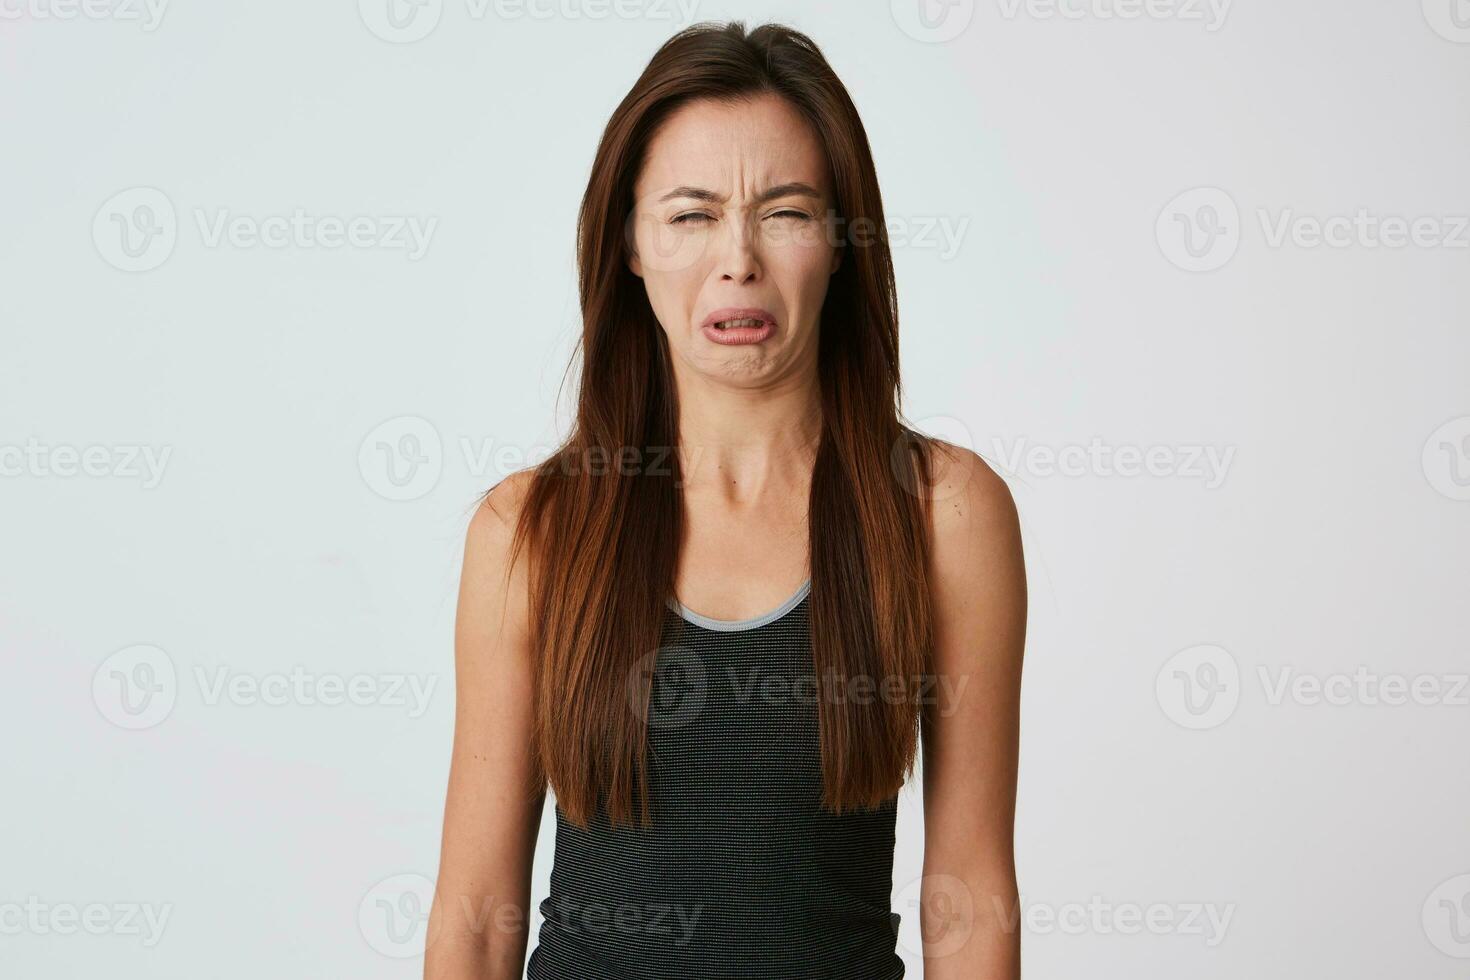 Upset hysterical young woman with long hair feels depressed and crying isolated over white background Looks offended and desperate photo